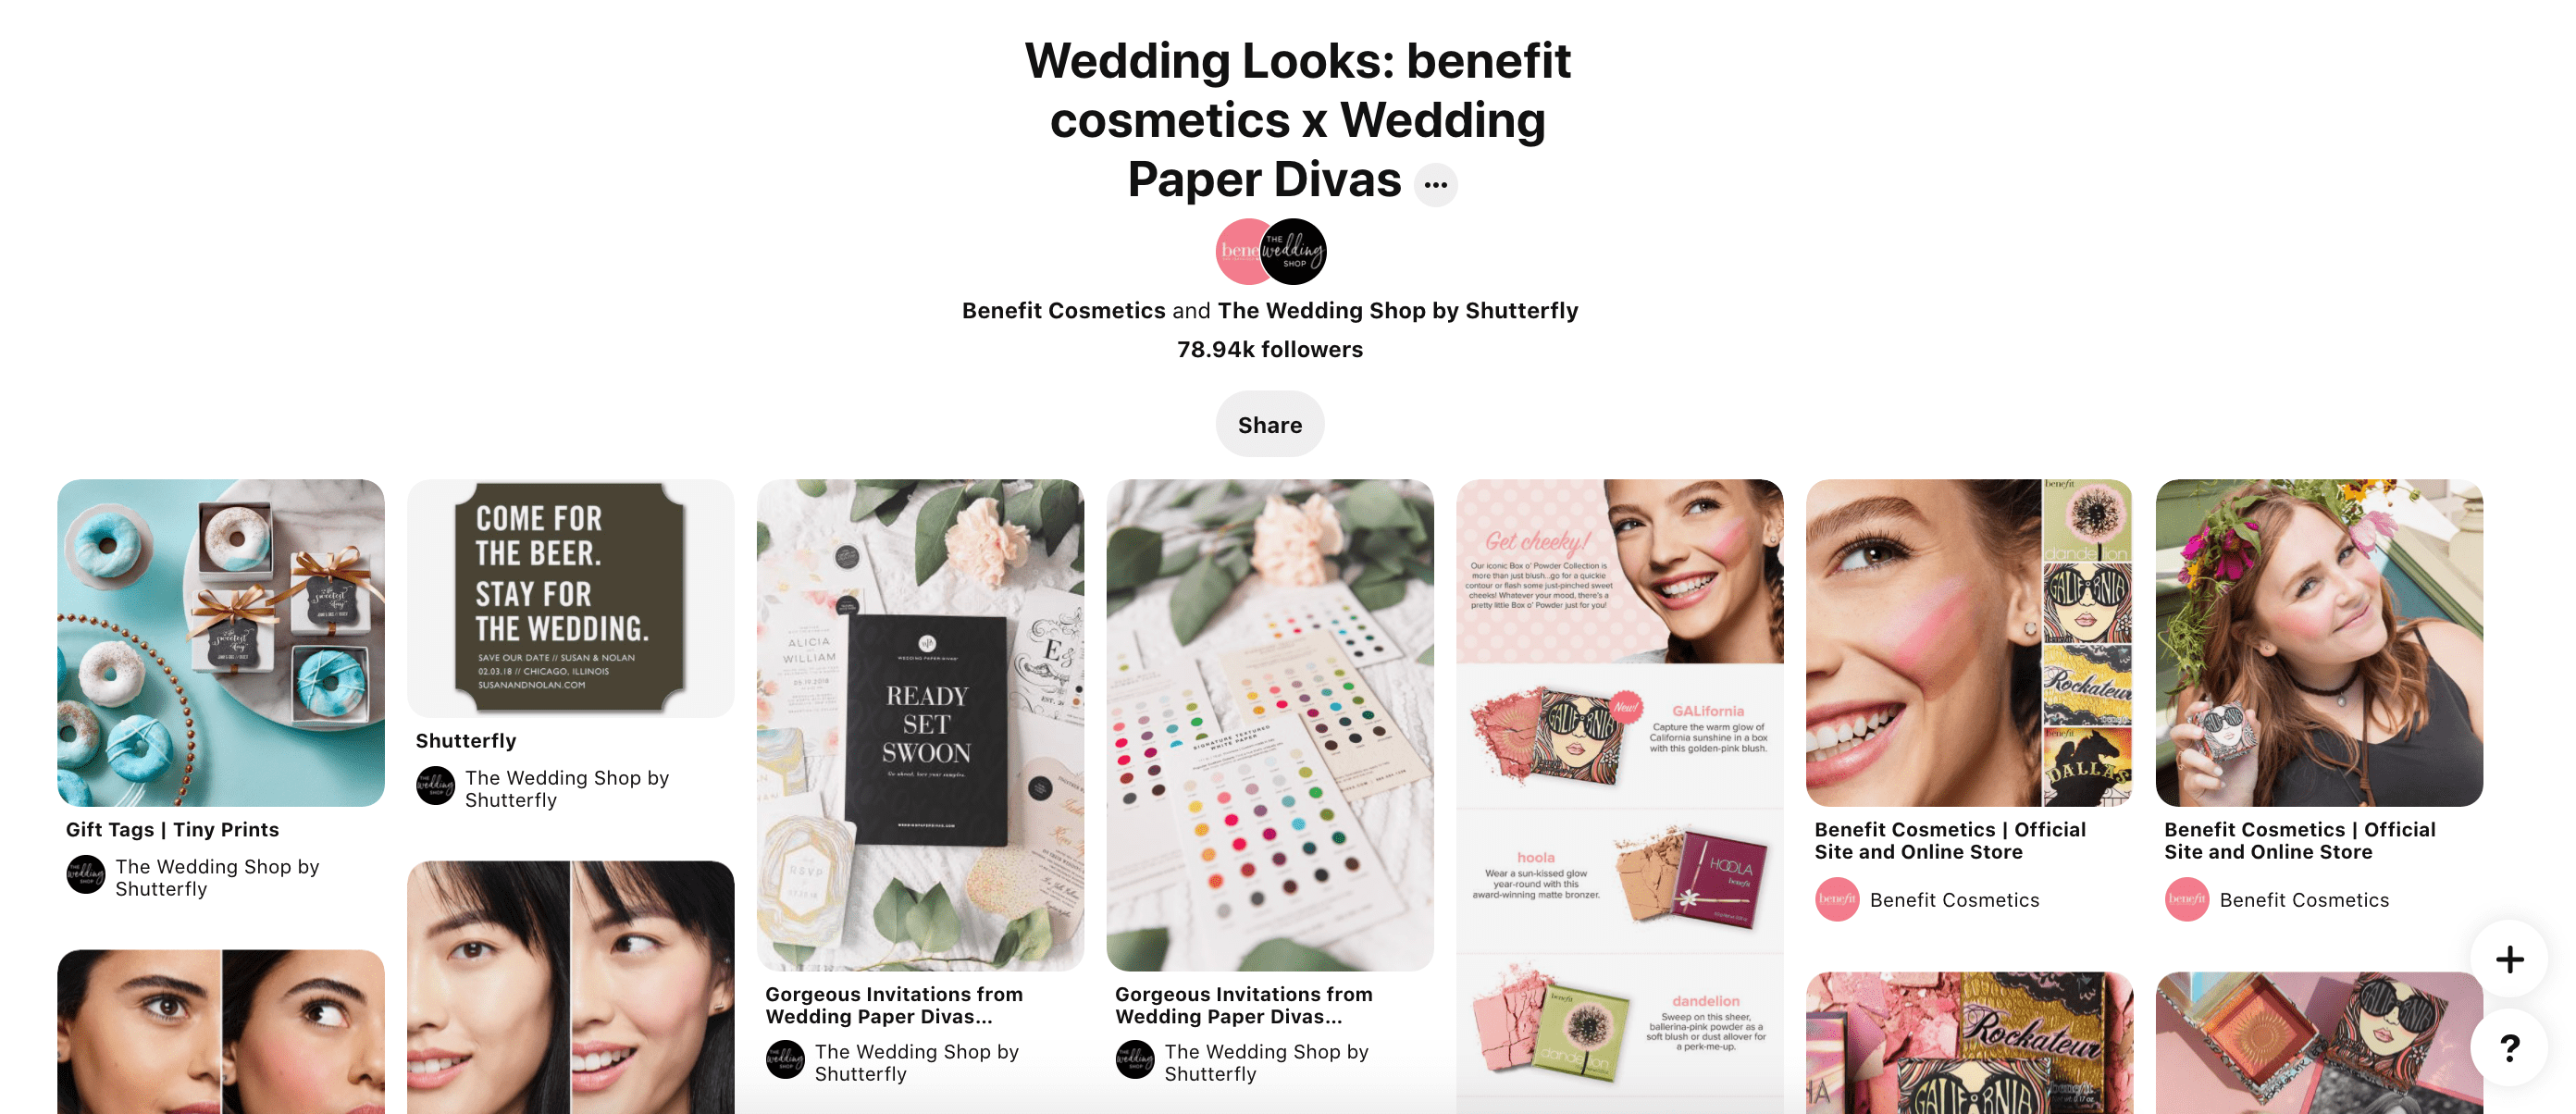 A Pinterest page that showcases a partnership between benefit cosmetics and shutterfly for weddings